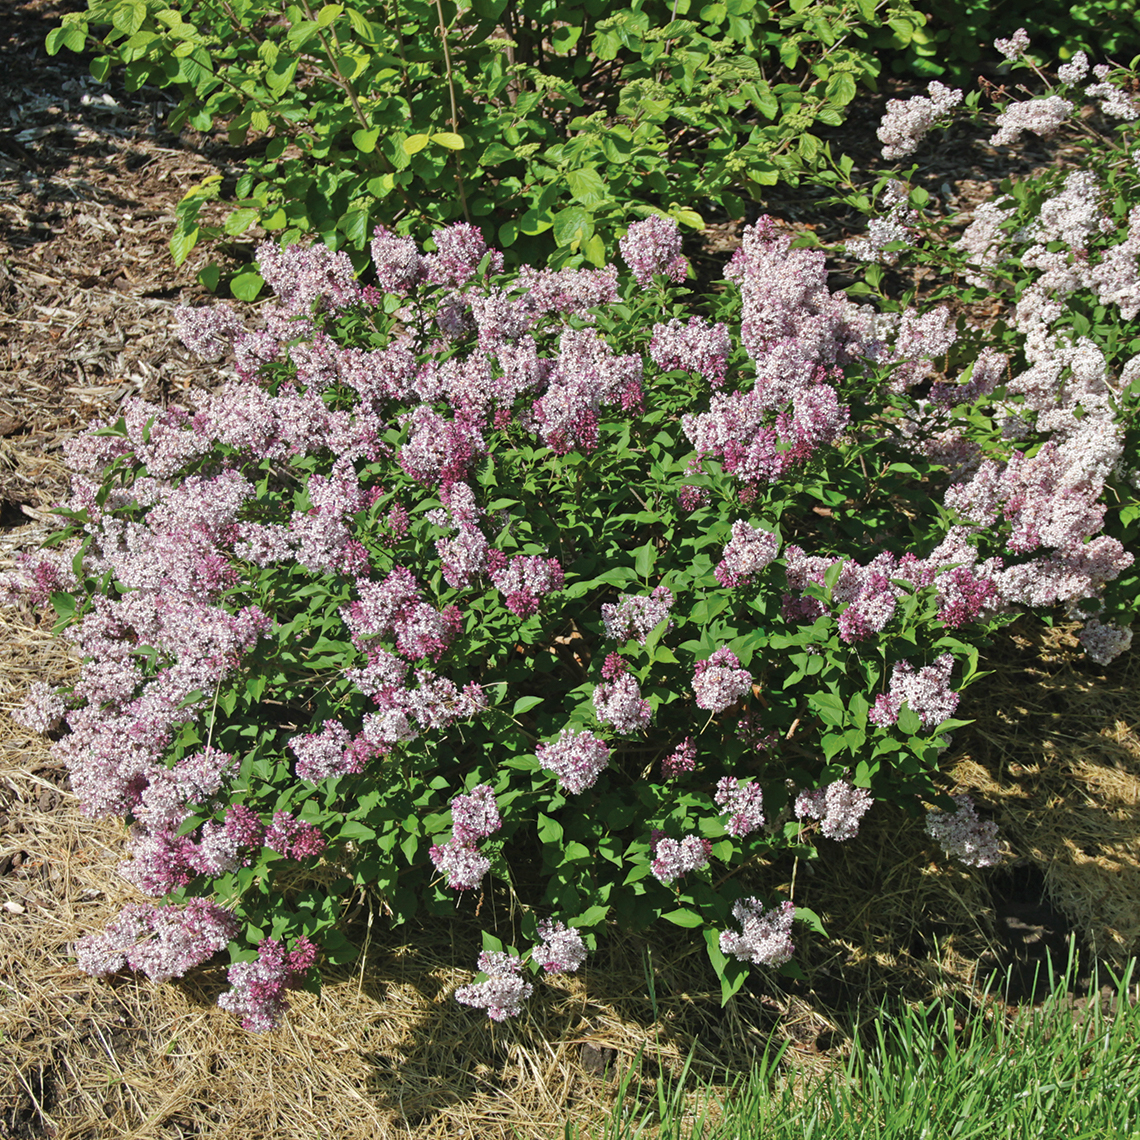 Baby Kim lilac offers a neat dwarf habit, fragrance, and high performance